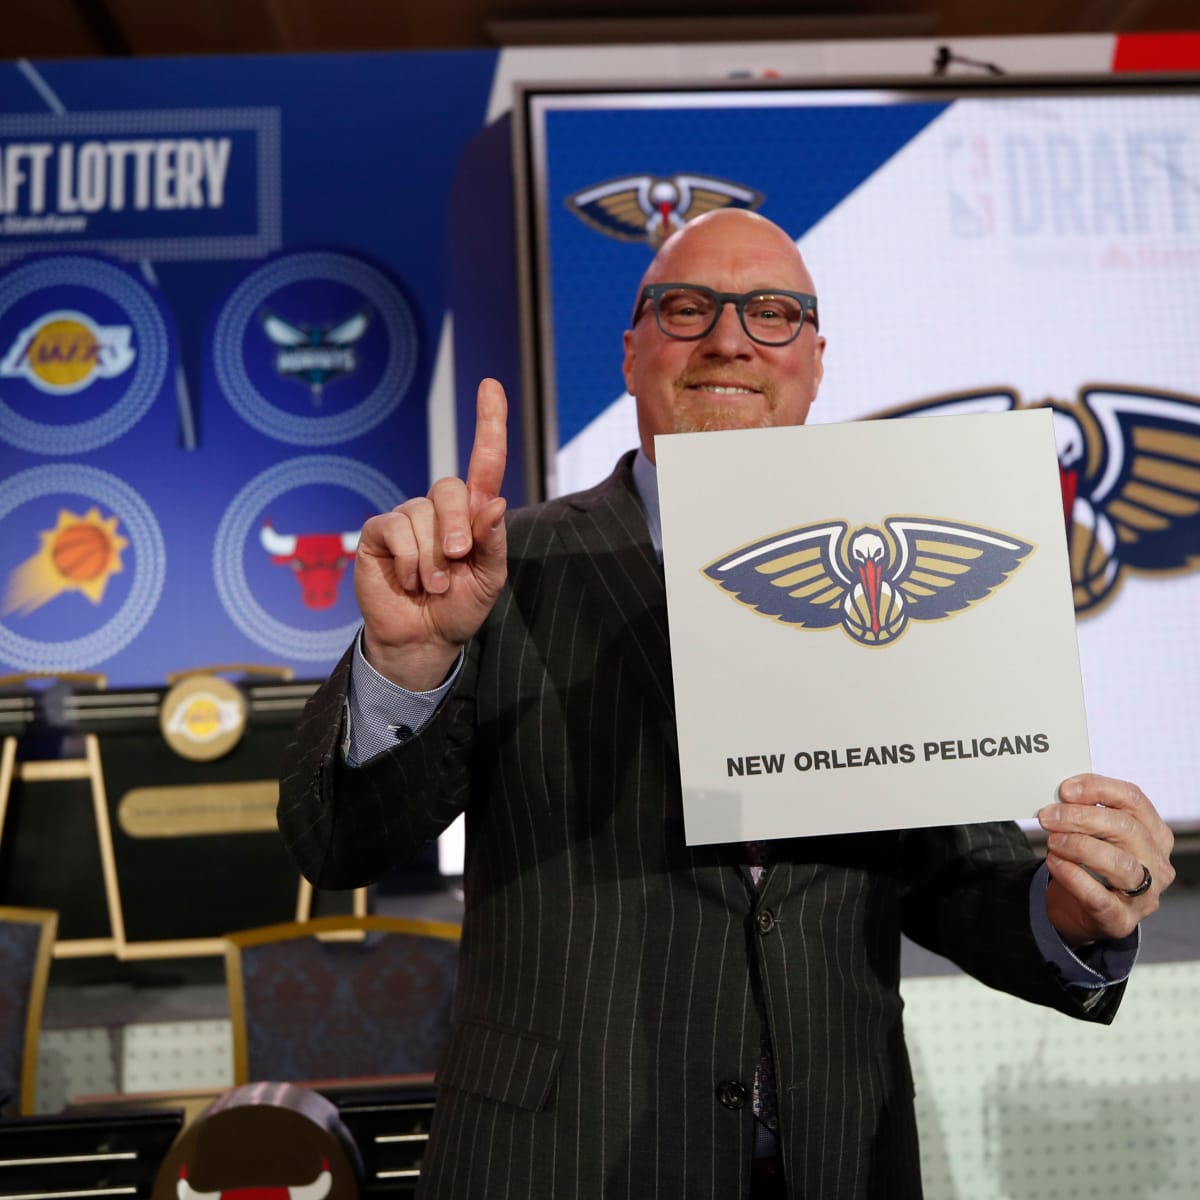 2019 NBA Draft Lottery winners and losers: Zion Williamson, the